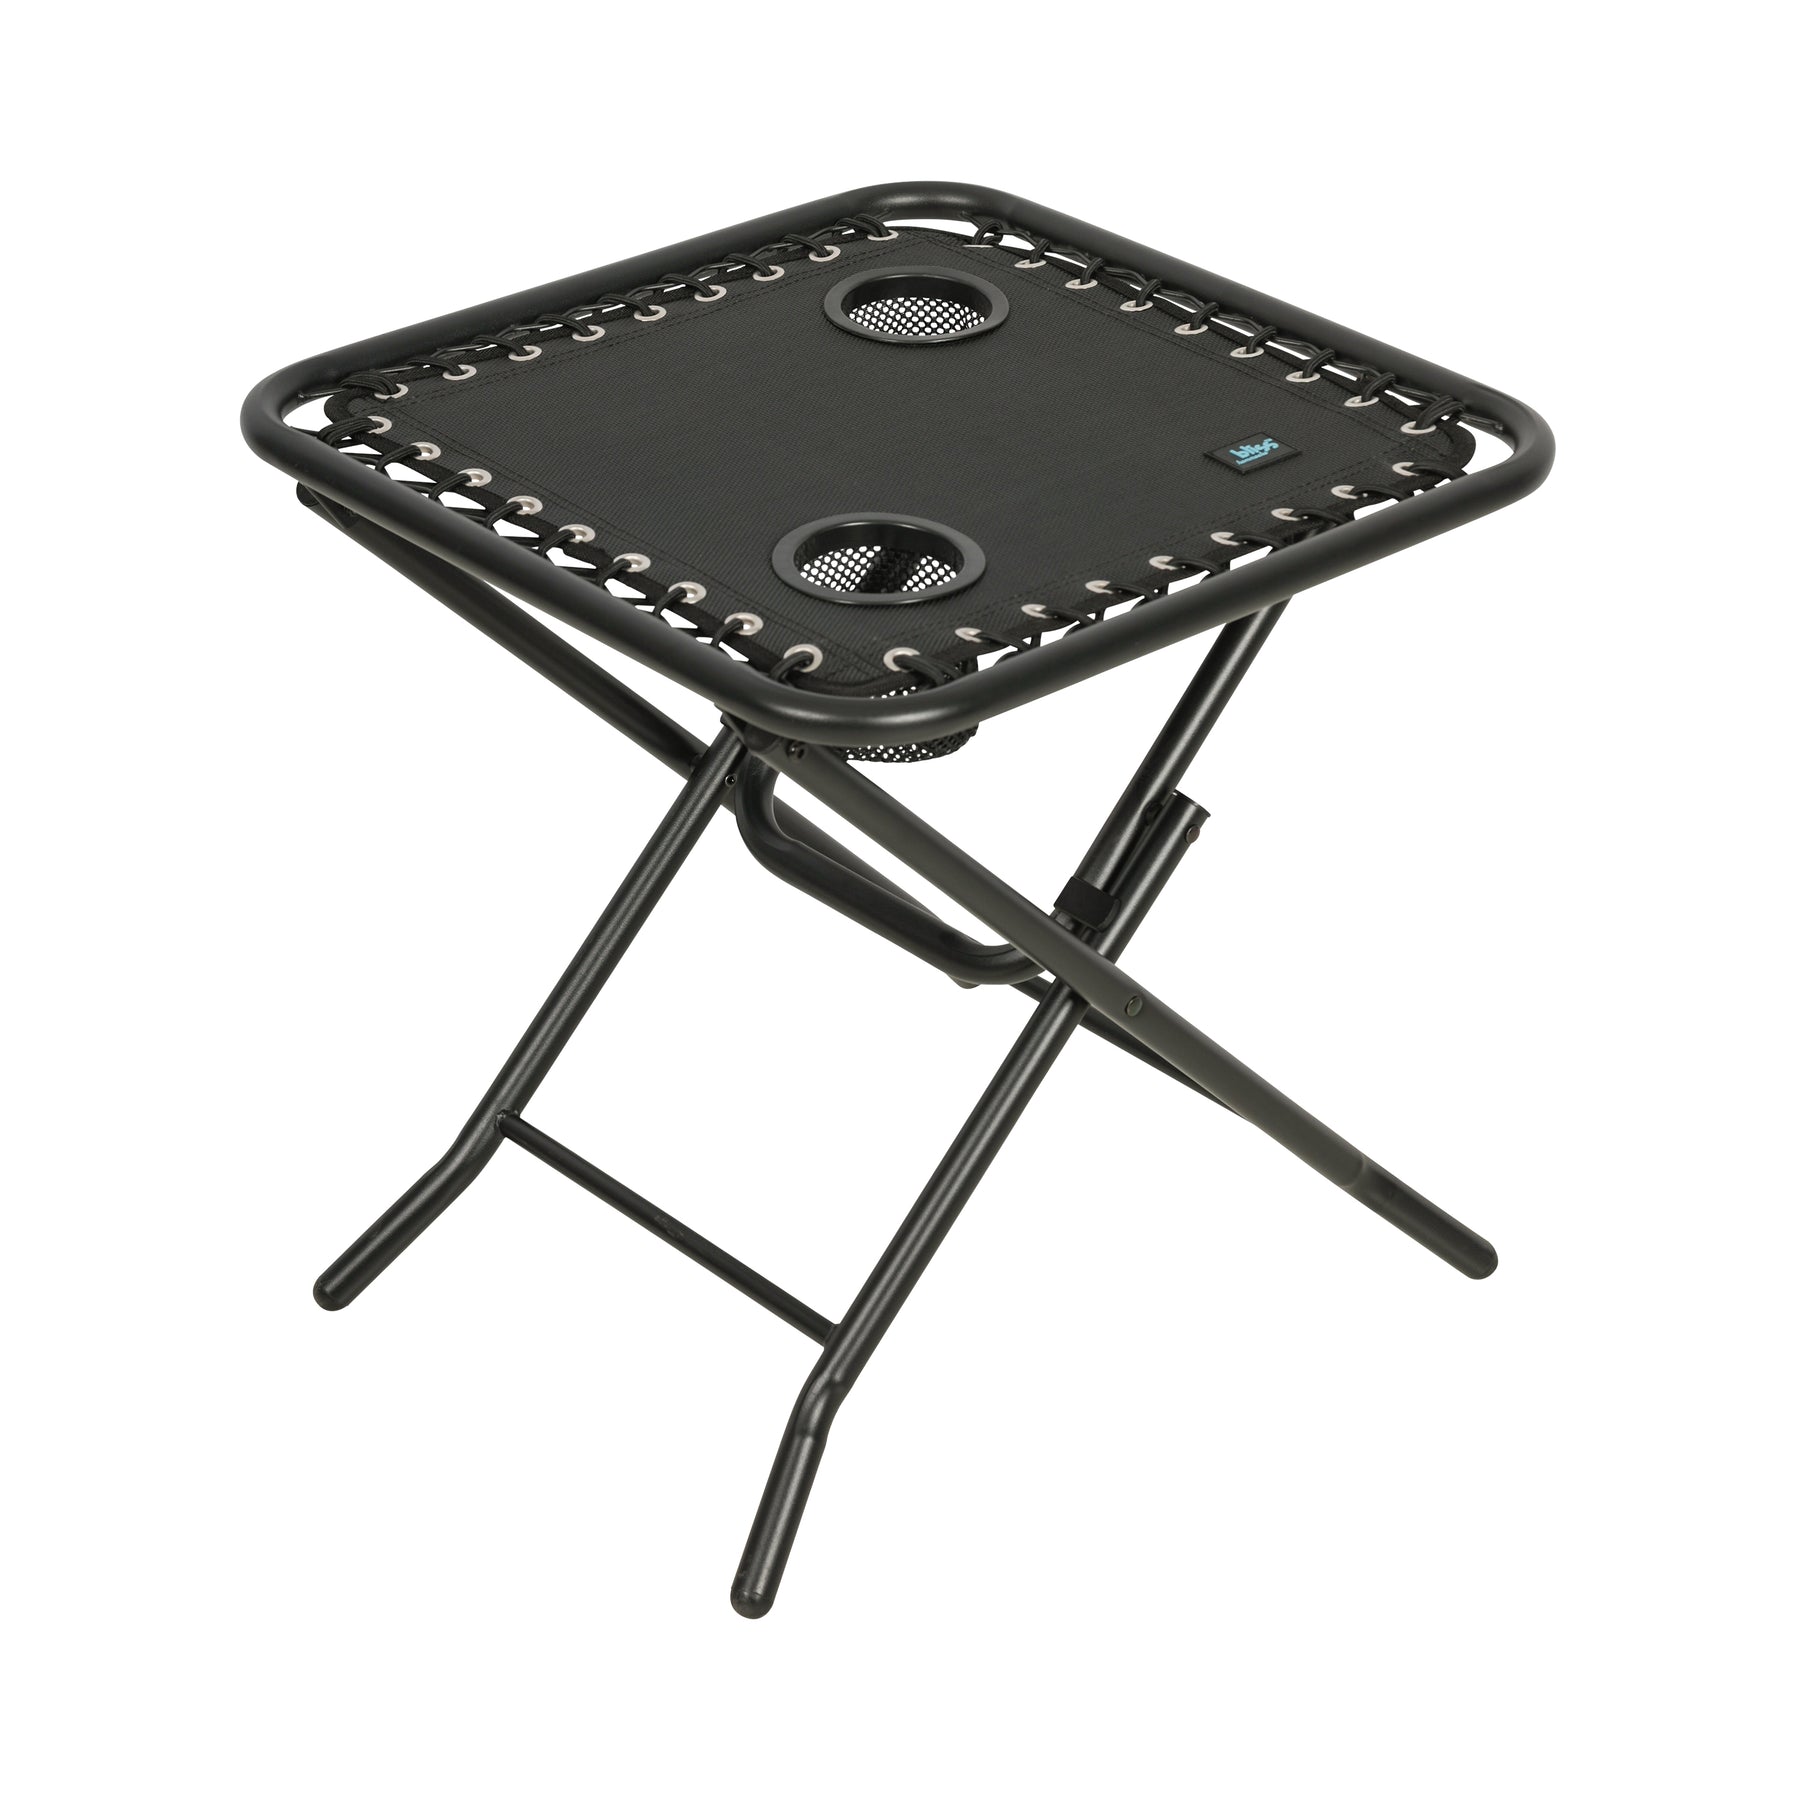 Bliss Hammocks 20-inch Folding Side Table with 2 Built-In Cup Holders in the black variation.